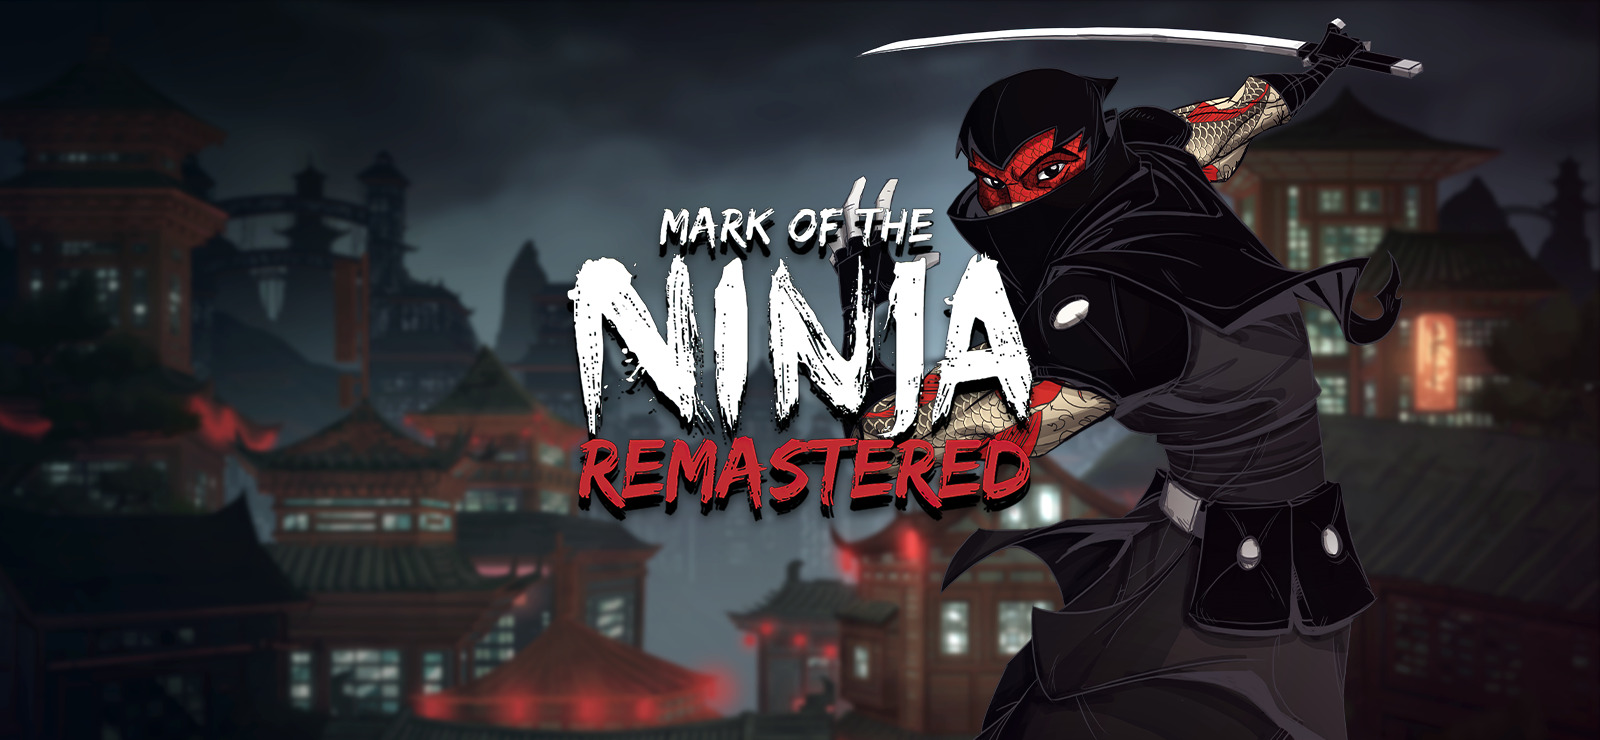 the mark of the ninja remastered download free